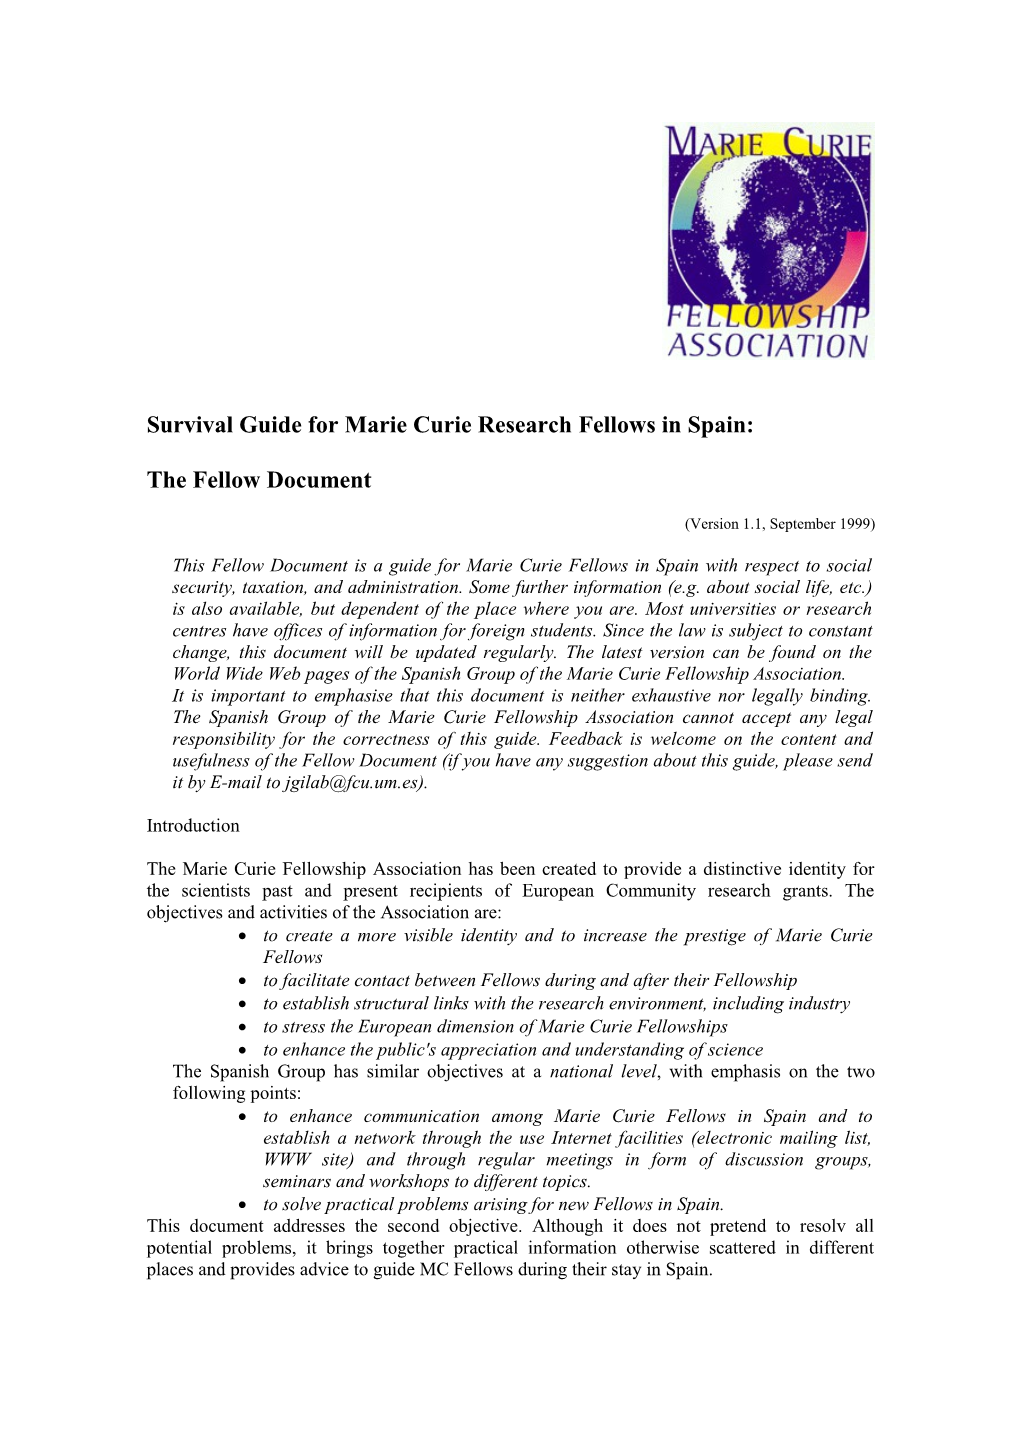 Survival Guide for Marie Curie Research Fellows in Spain